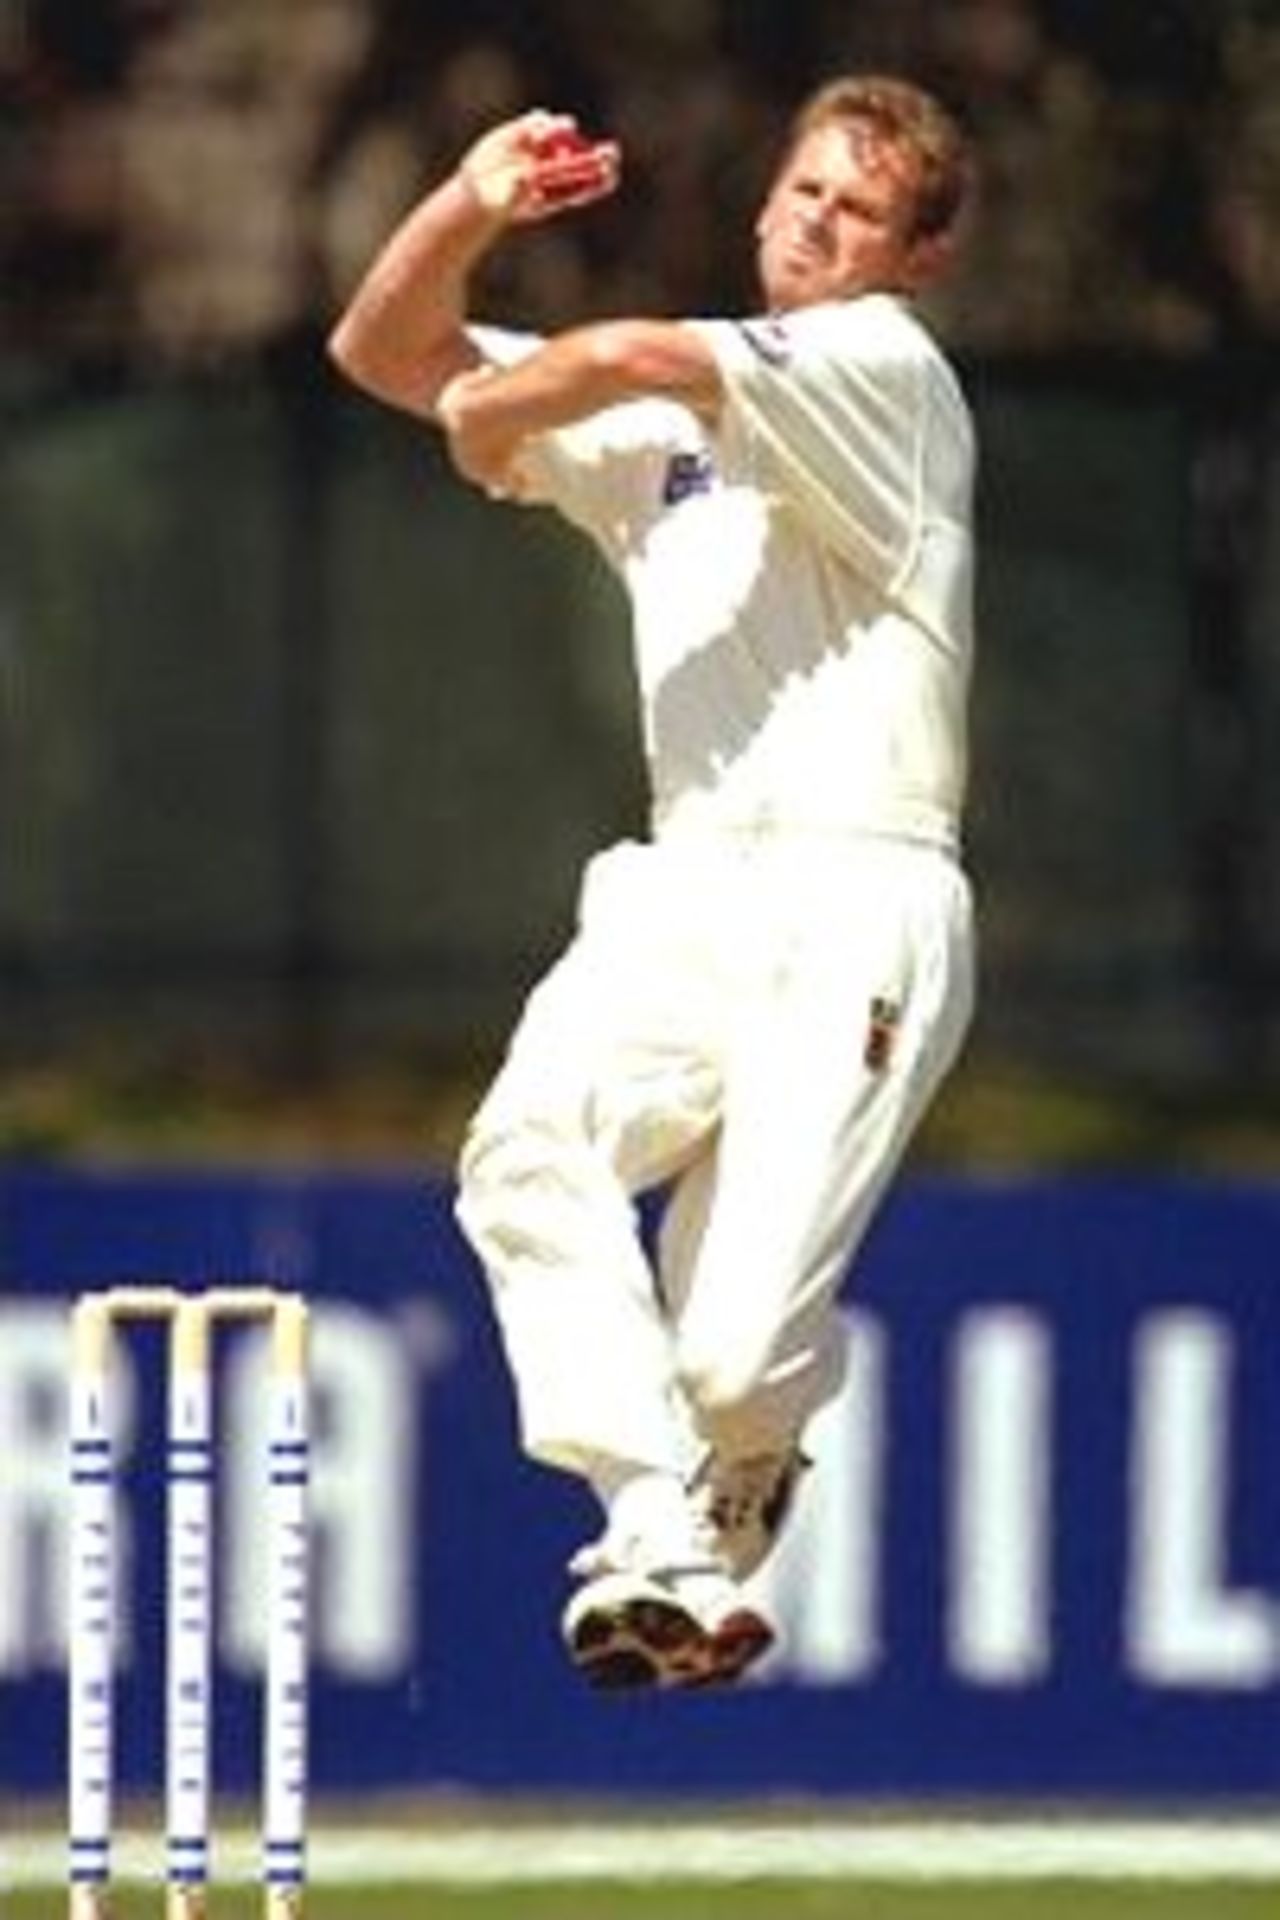 28 Oct 2000: Paul Reiffel of Victoria unleashes a delivery, during the Pura Cup Cricket match between Victoria and New South Wales, played at Punt Rd Oval in Melbourne, Australia.